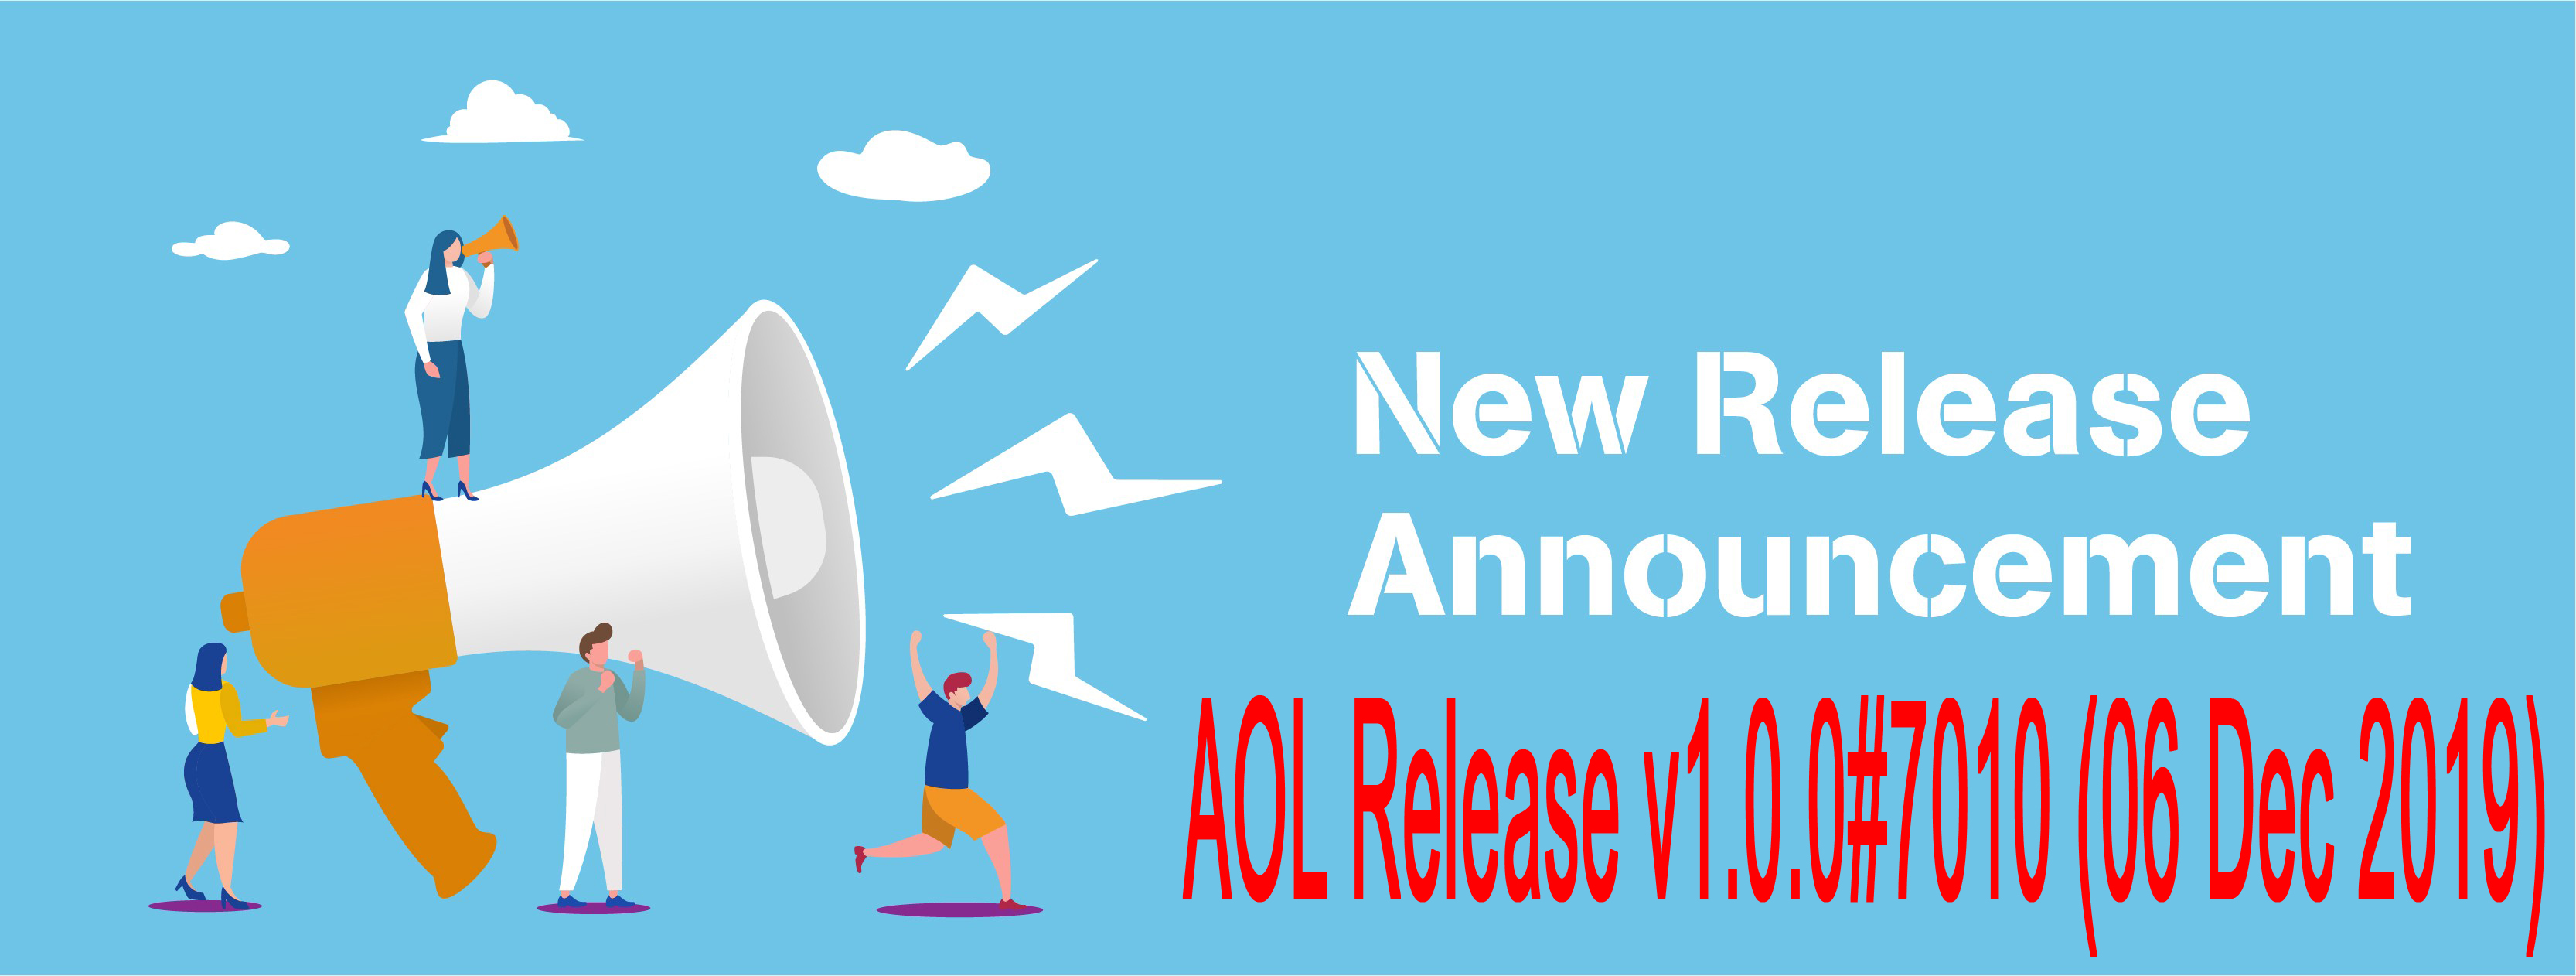 Accurate Online Release v1.0.0#7010 (06 Dec 2019)